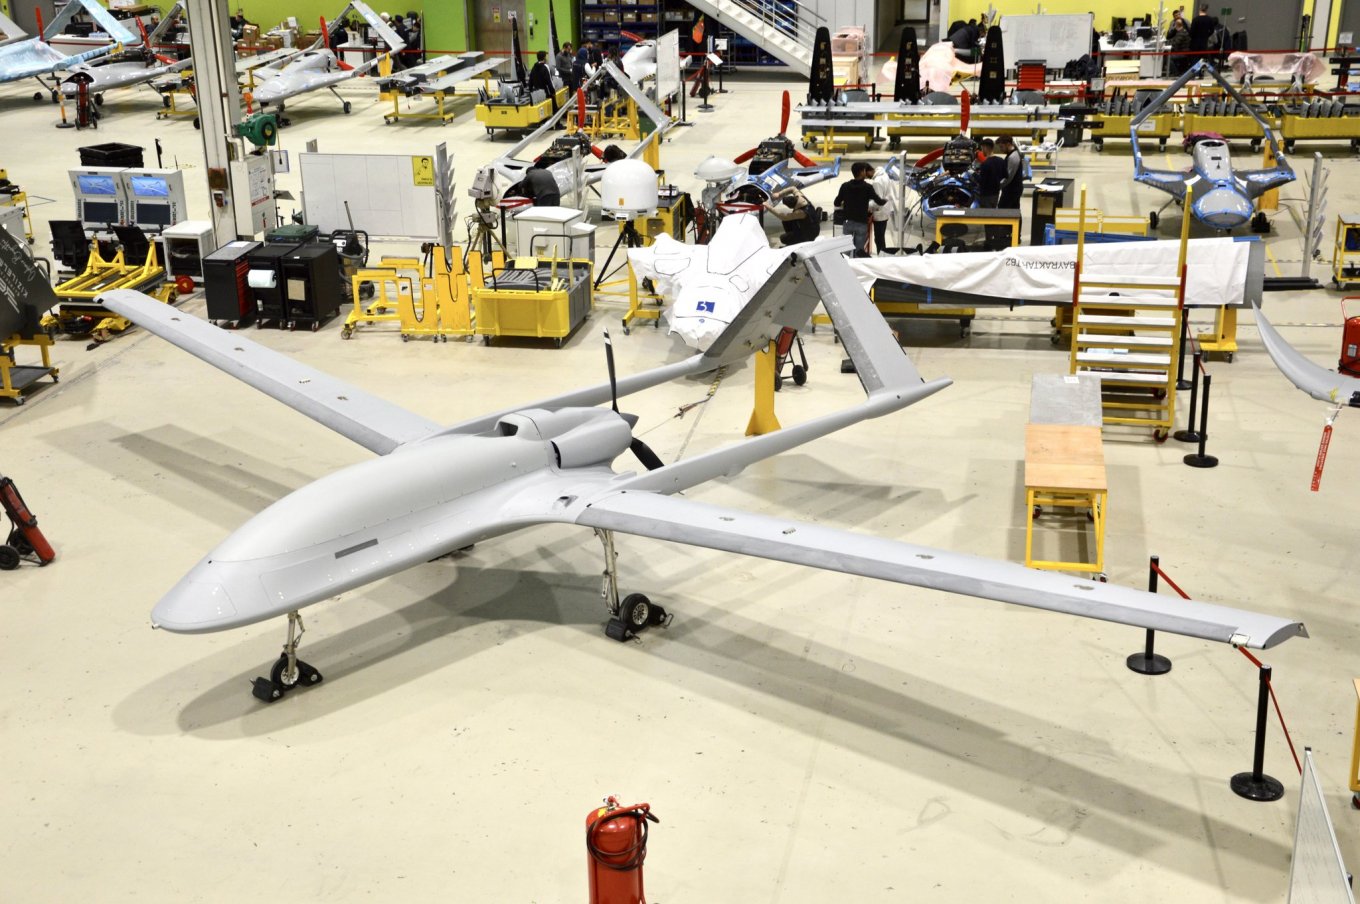 The Bayraktar TB3 unmanned combat aerial vehicle Defense Express Baykar Production Facility is Overloaded with Orders for New Bayraktar TB3 UCAV